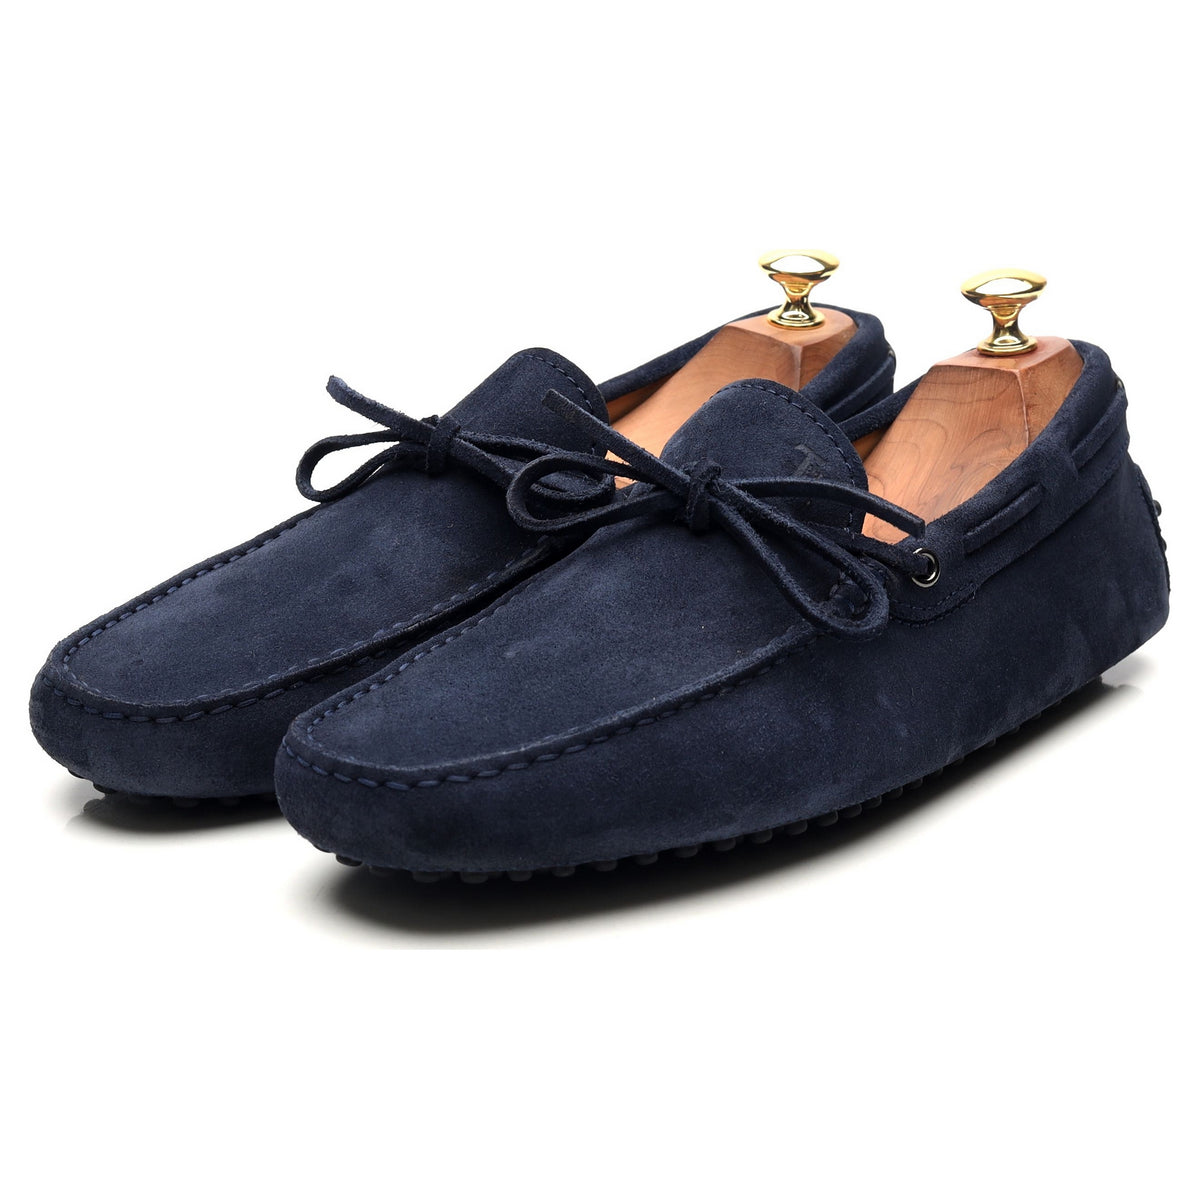 Gommino Navy Blue Suede Driving Loafers UK 9